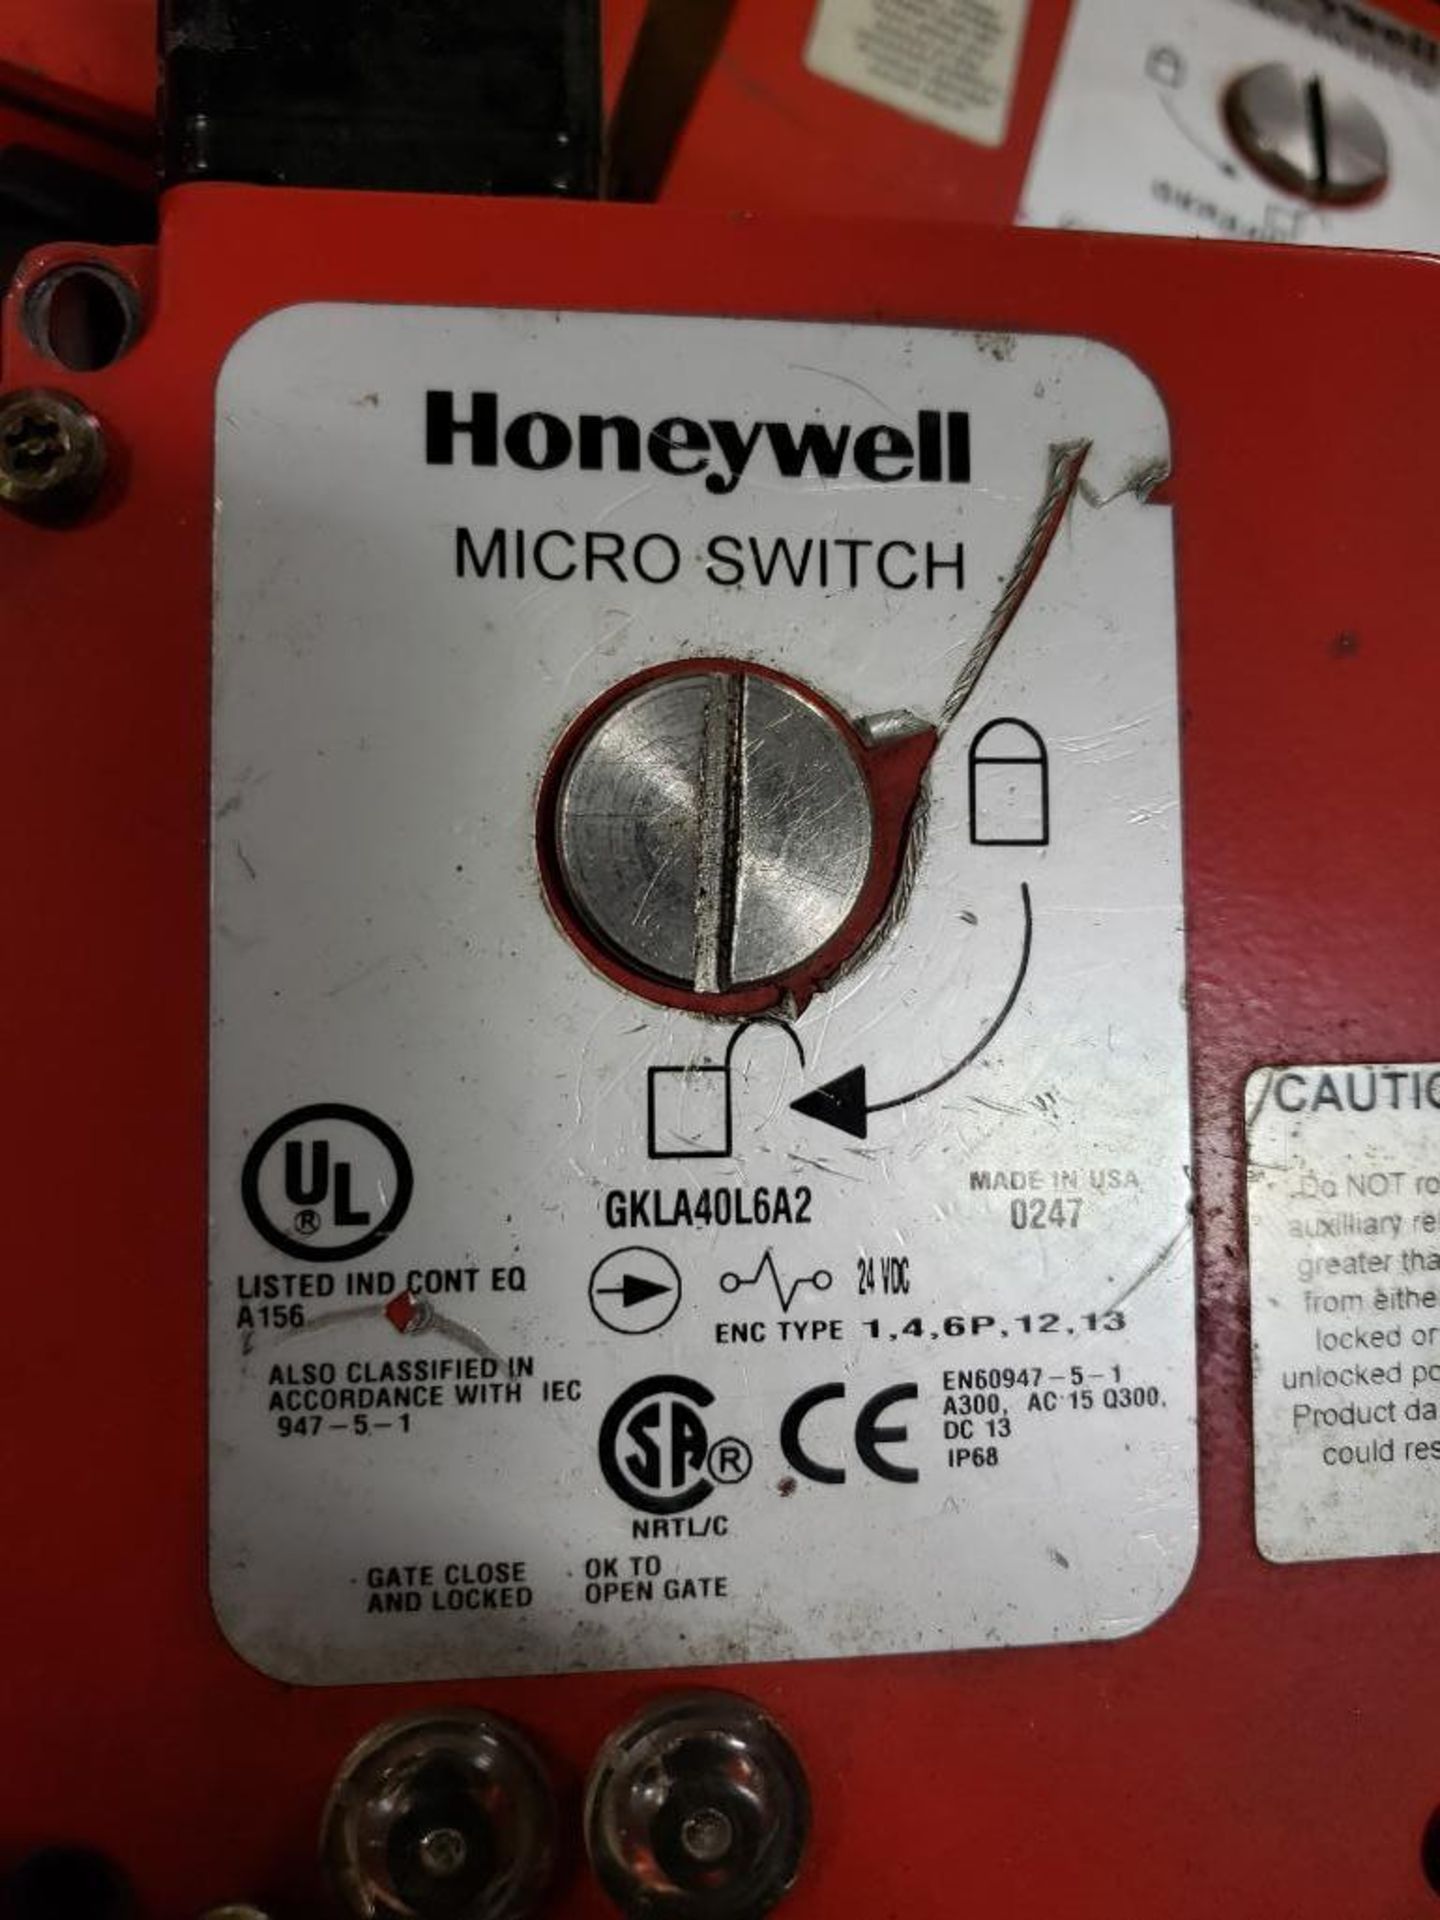 Qty 5 - Honeywell Microswitch. Part number GKLA40L6A2. - Image 2 of 2